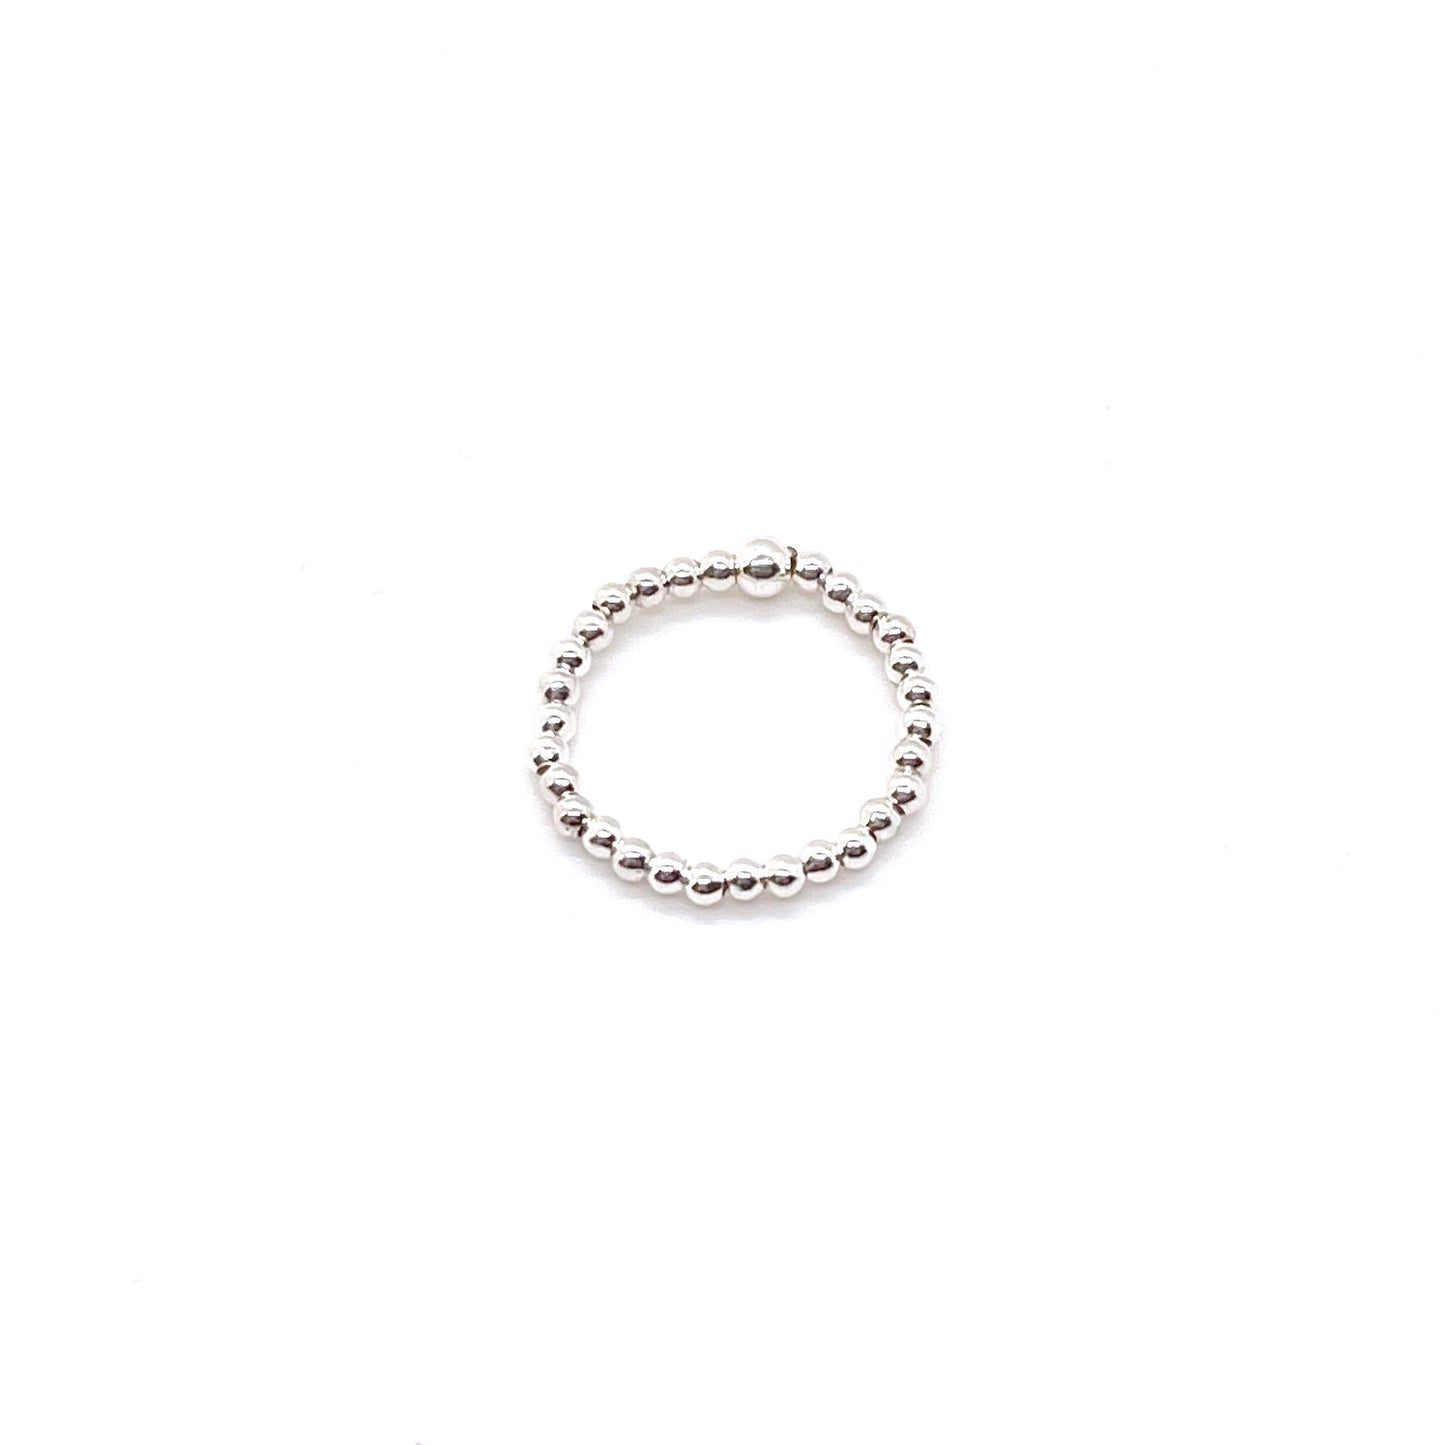 Silver ball ring with 2mm waterproof sterling silver beads on elastic stretch cord.